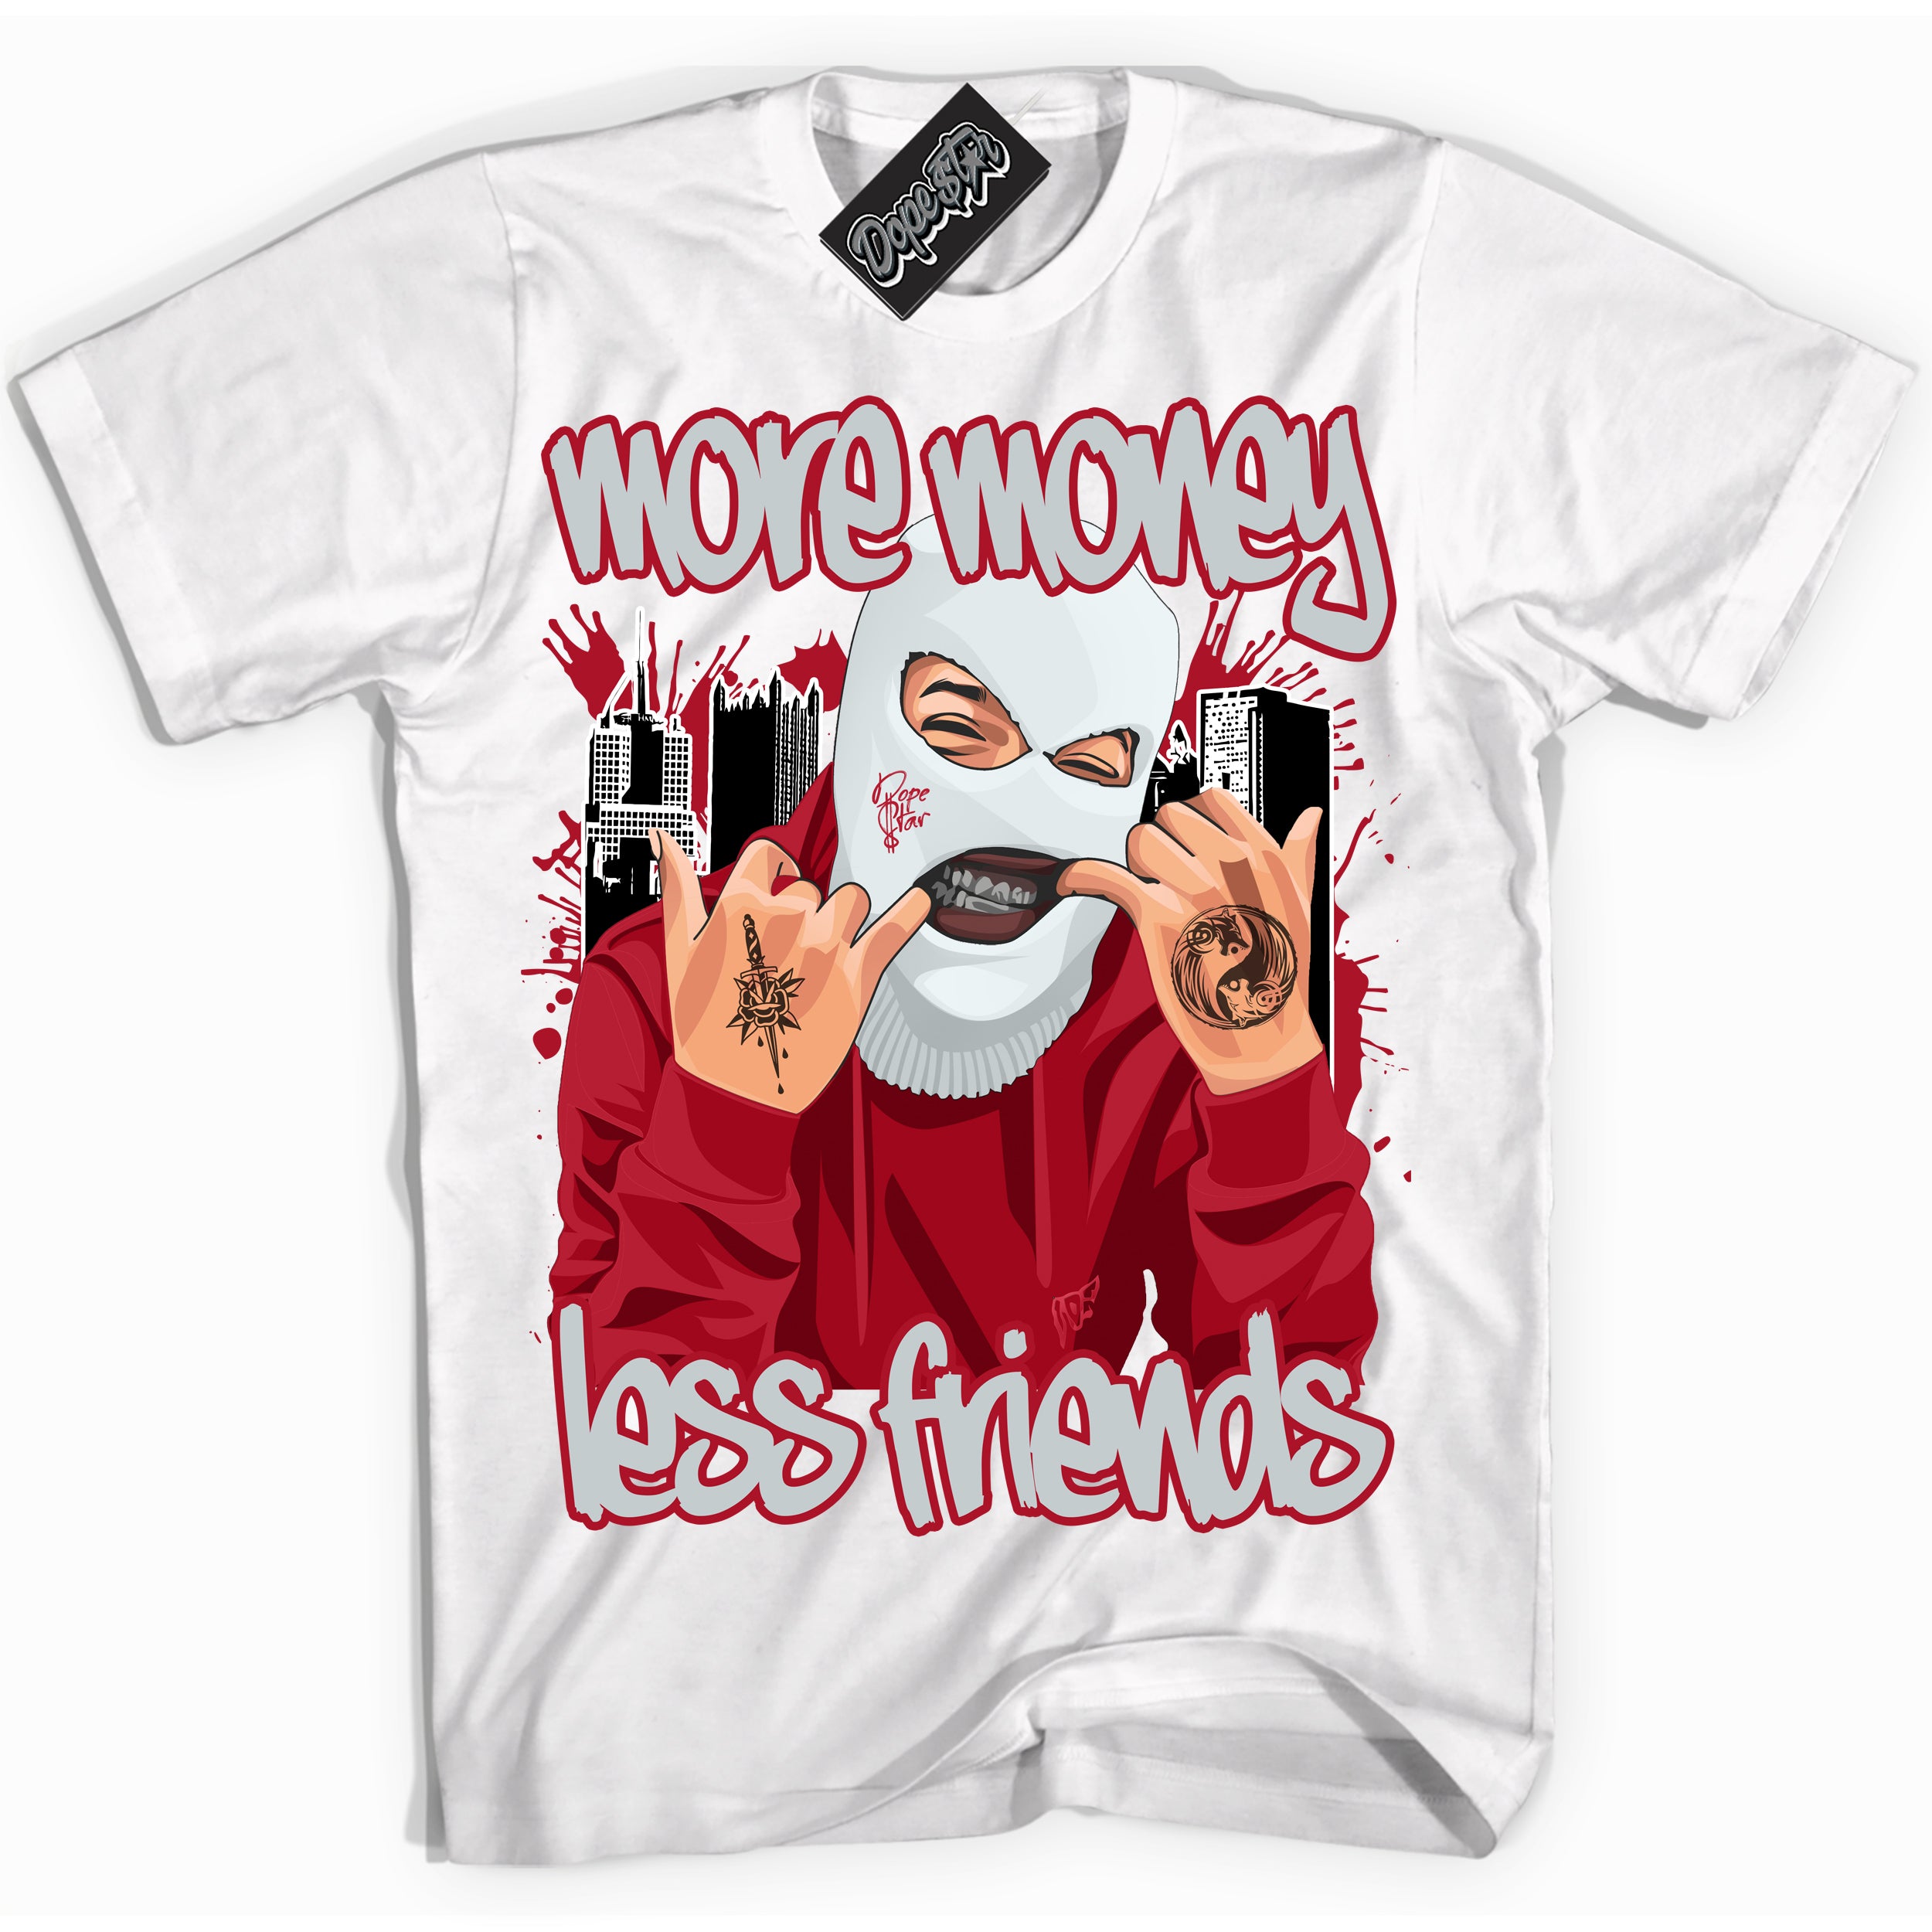 Cool White Shirt with “ More Money Less Friends” design that perfectly matches Reverse Ultraman Sneakers.